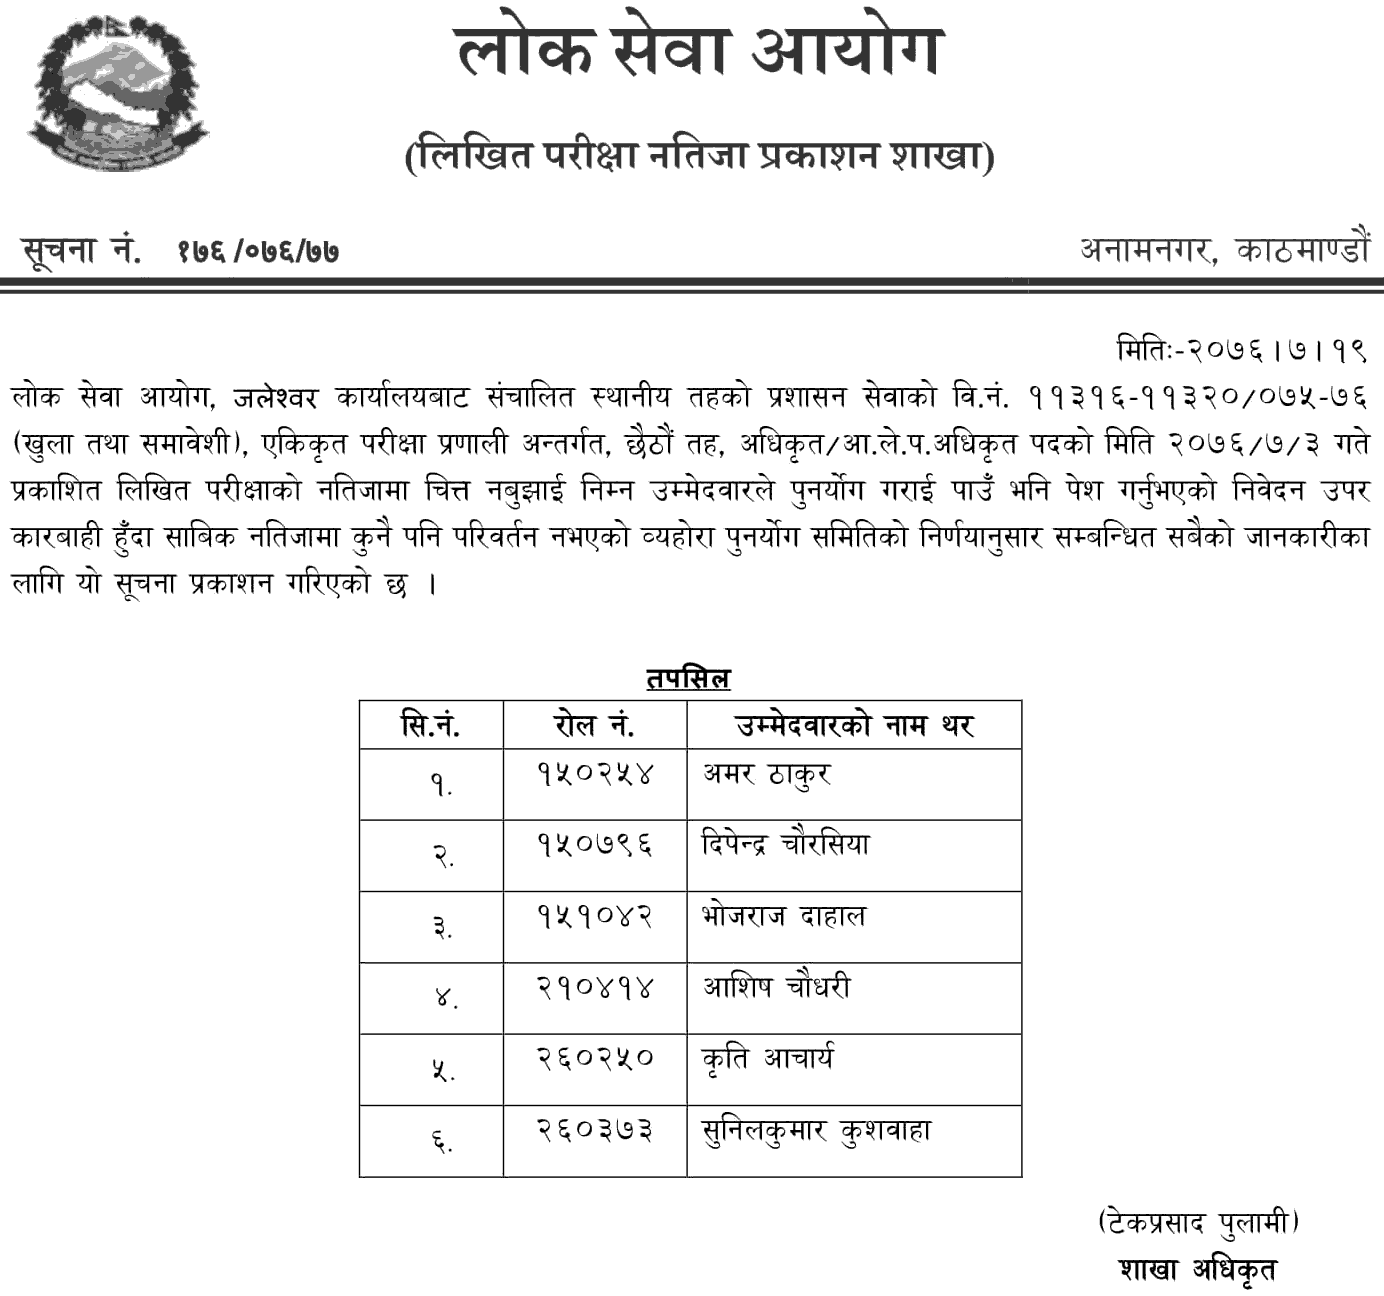 Lok Sewa Aayog Jaleshowr Local Level Officer Class Re-totaling Result